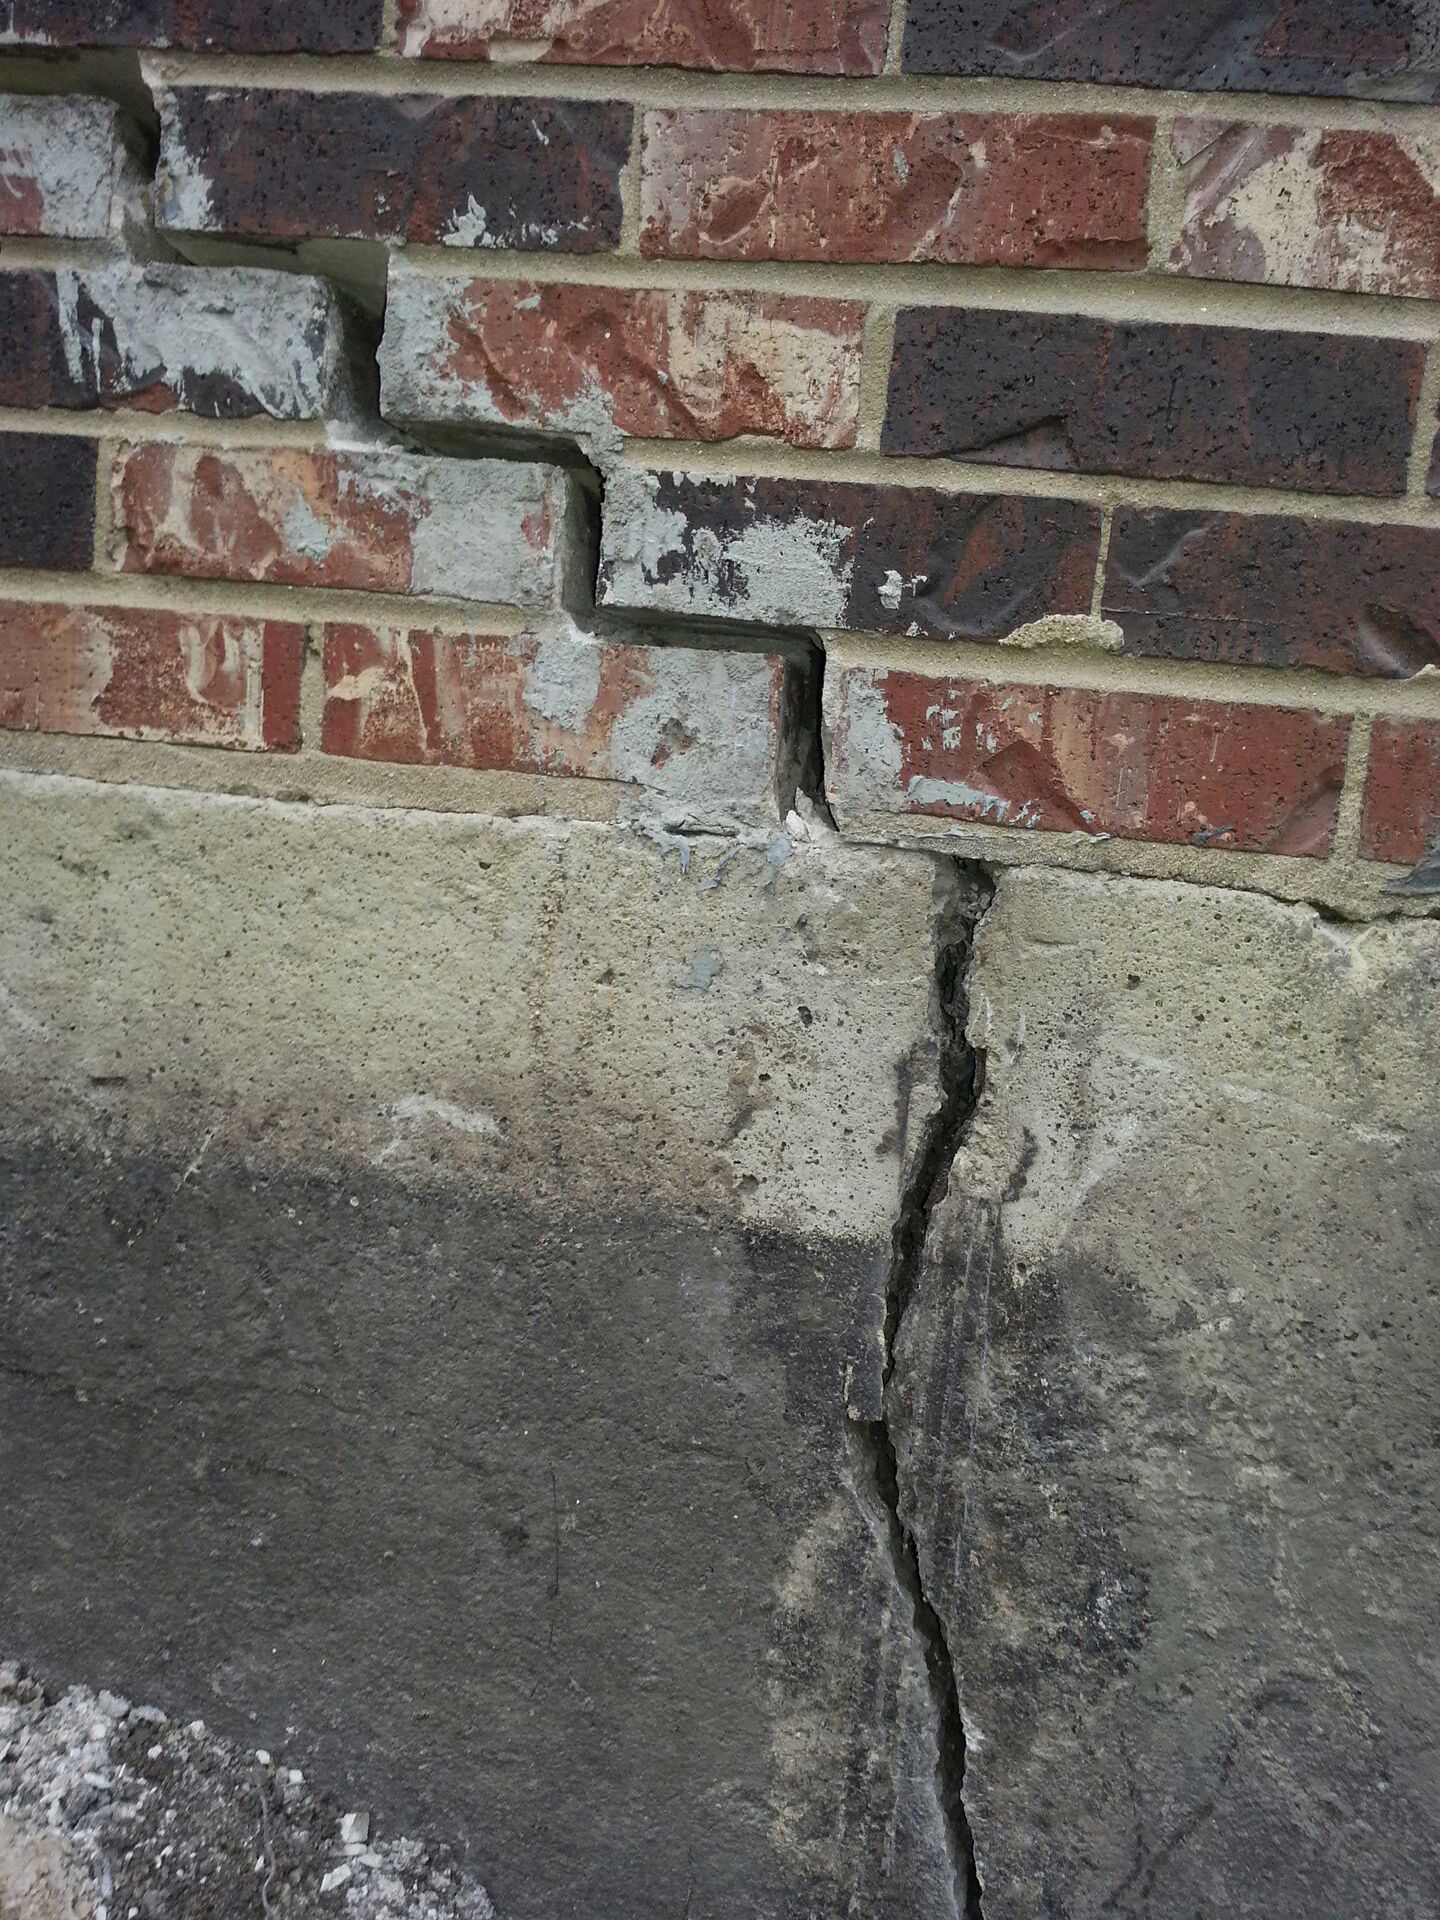 Can I Just Repair Cracks Caused by My Foundation Settling?